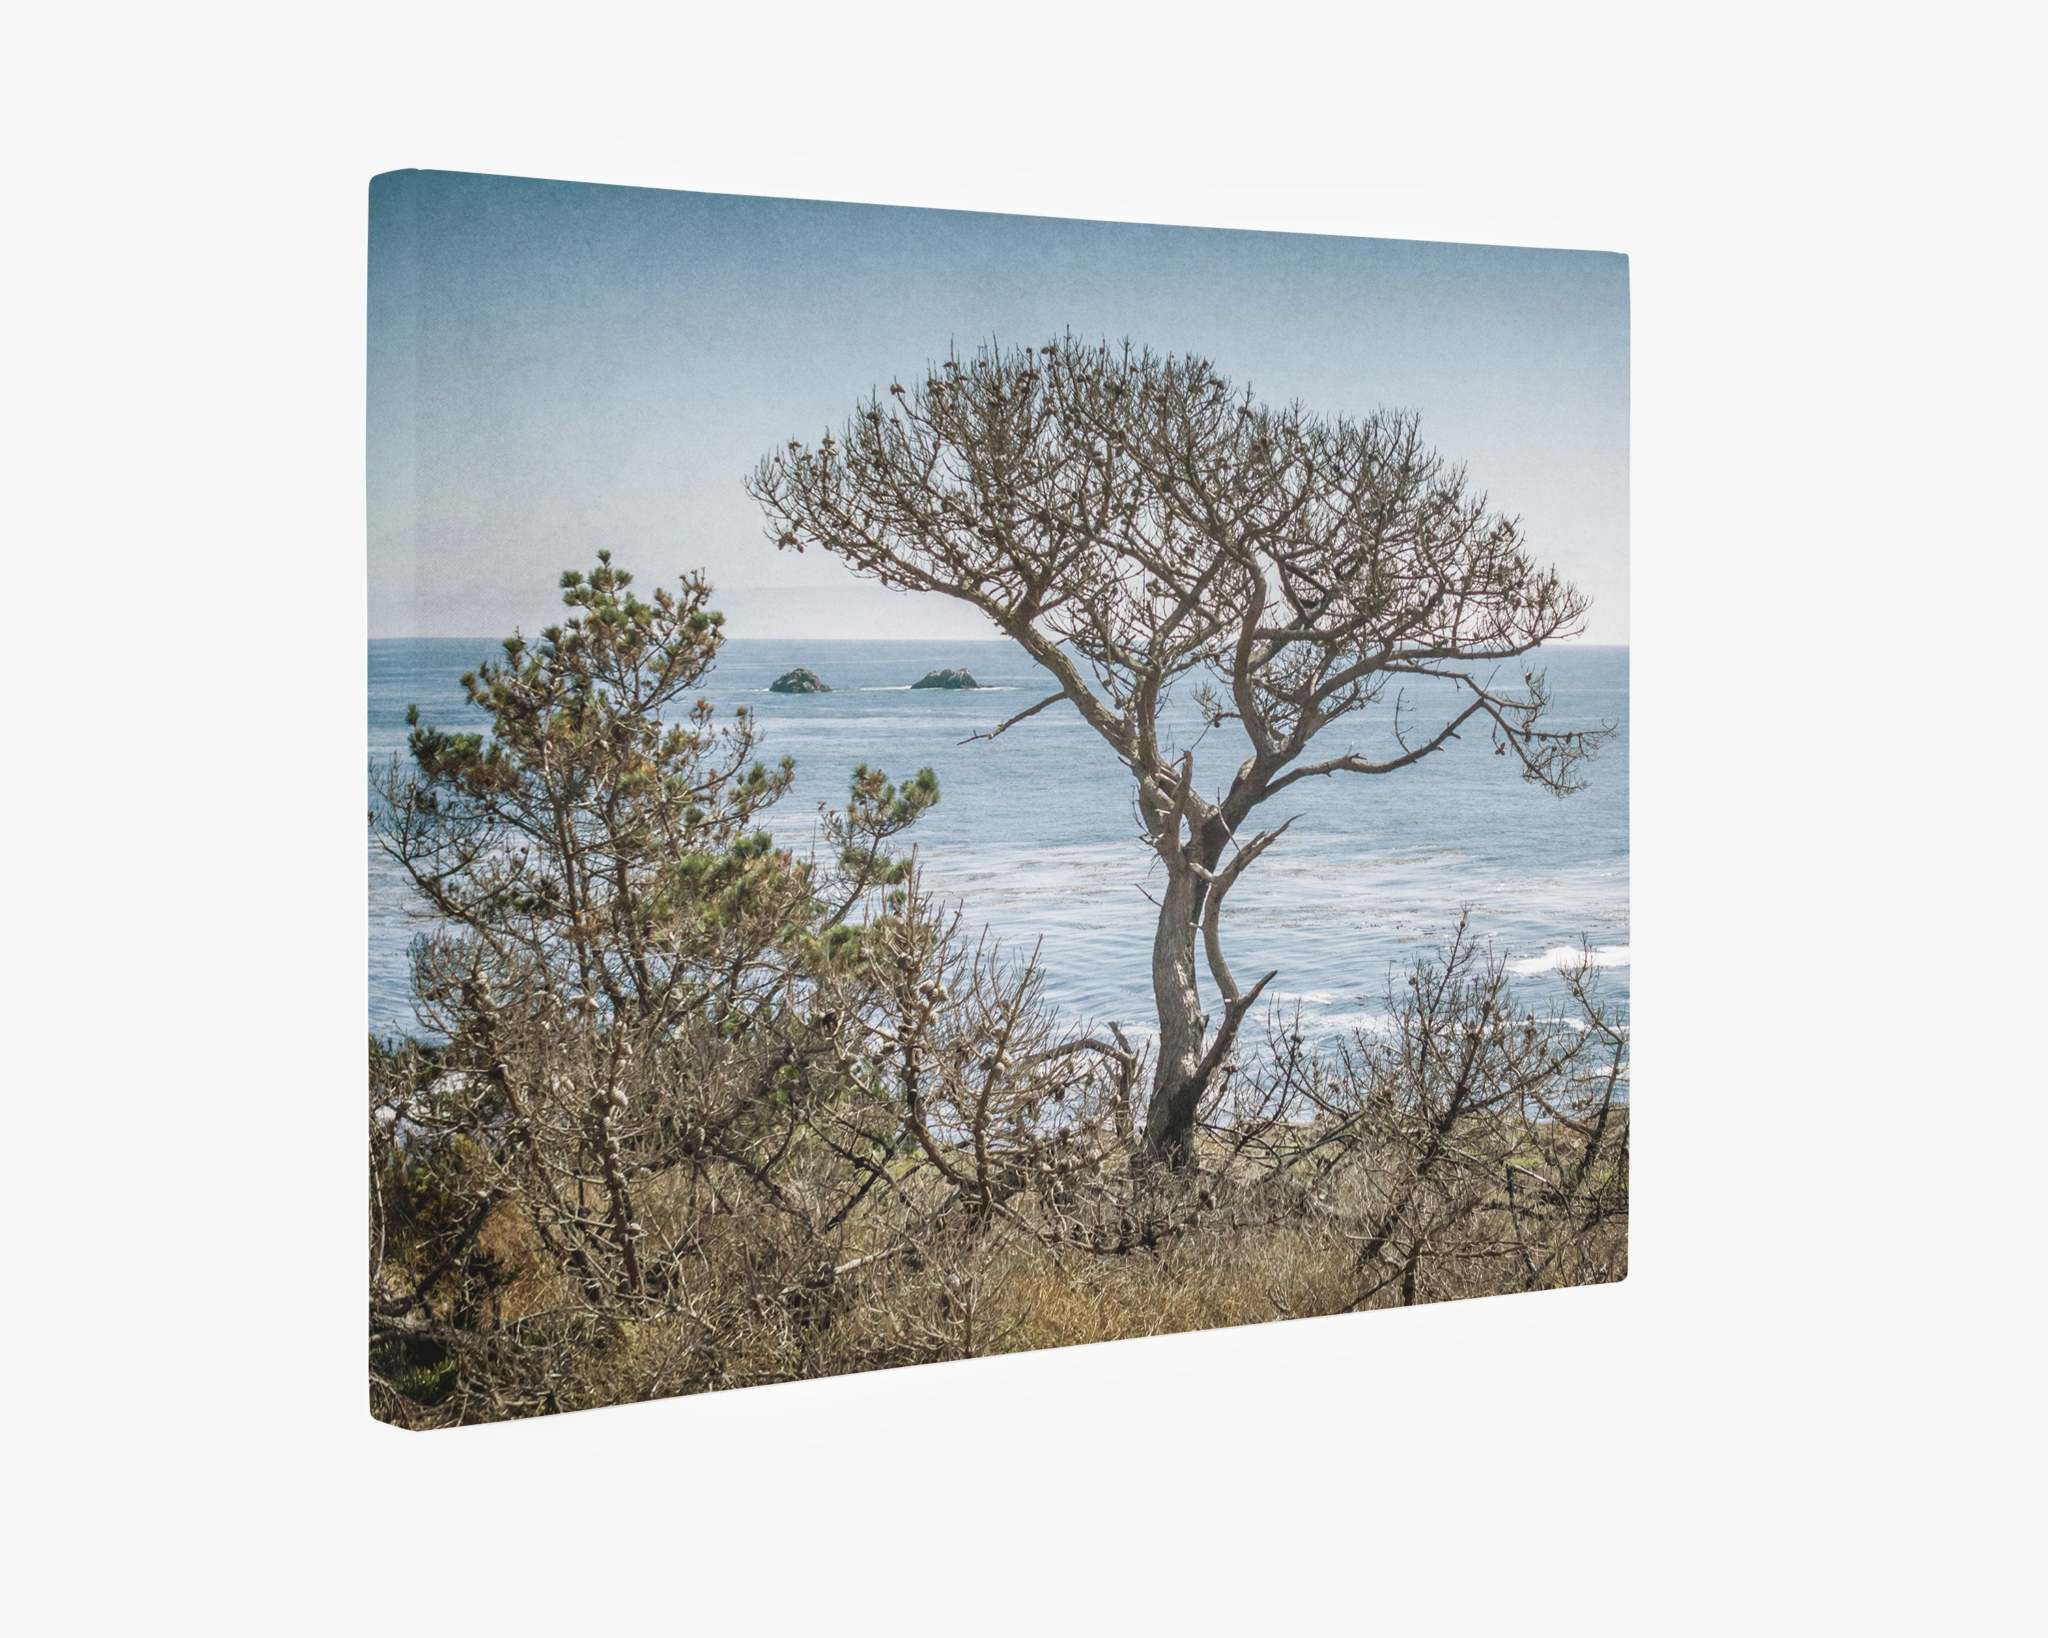 The Offley Green California Landscape Canvas Art in Big Sur, &#39;Wind Blown Tree&#39; depicts a serene coastal scene along the Big Sur coastline with a tall, leafless tree in the foreground. The ocean stretches out behind it under a clear blue sky, with rocky outcrops visible in the distance and sparse vegetation surrounding the area.